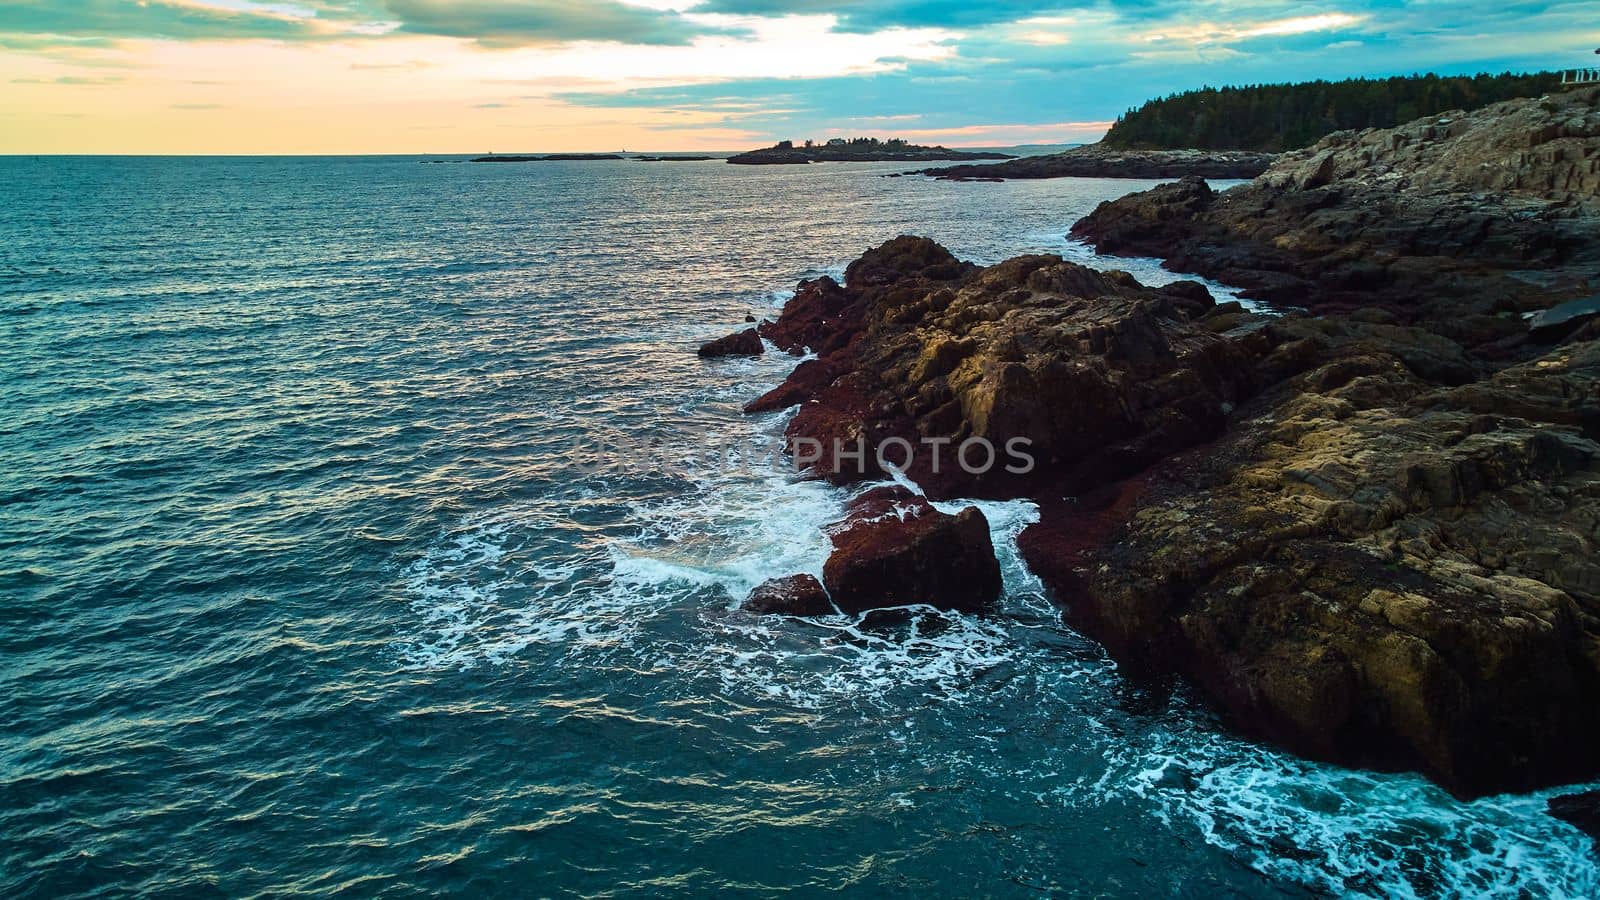 Serene ocean view over coasts of Maine with rocky coasts, waves crashing, and sunset light by njproductions